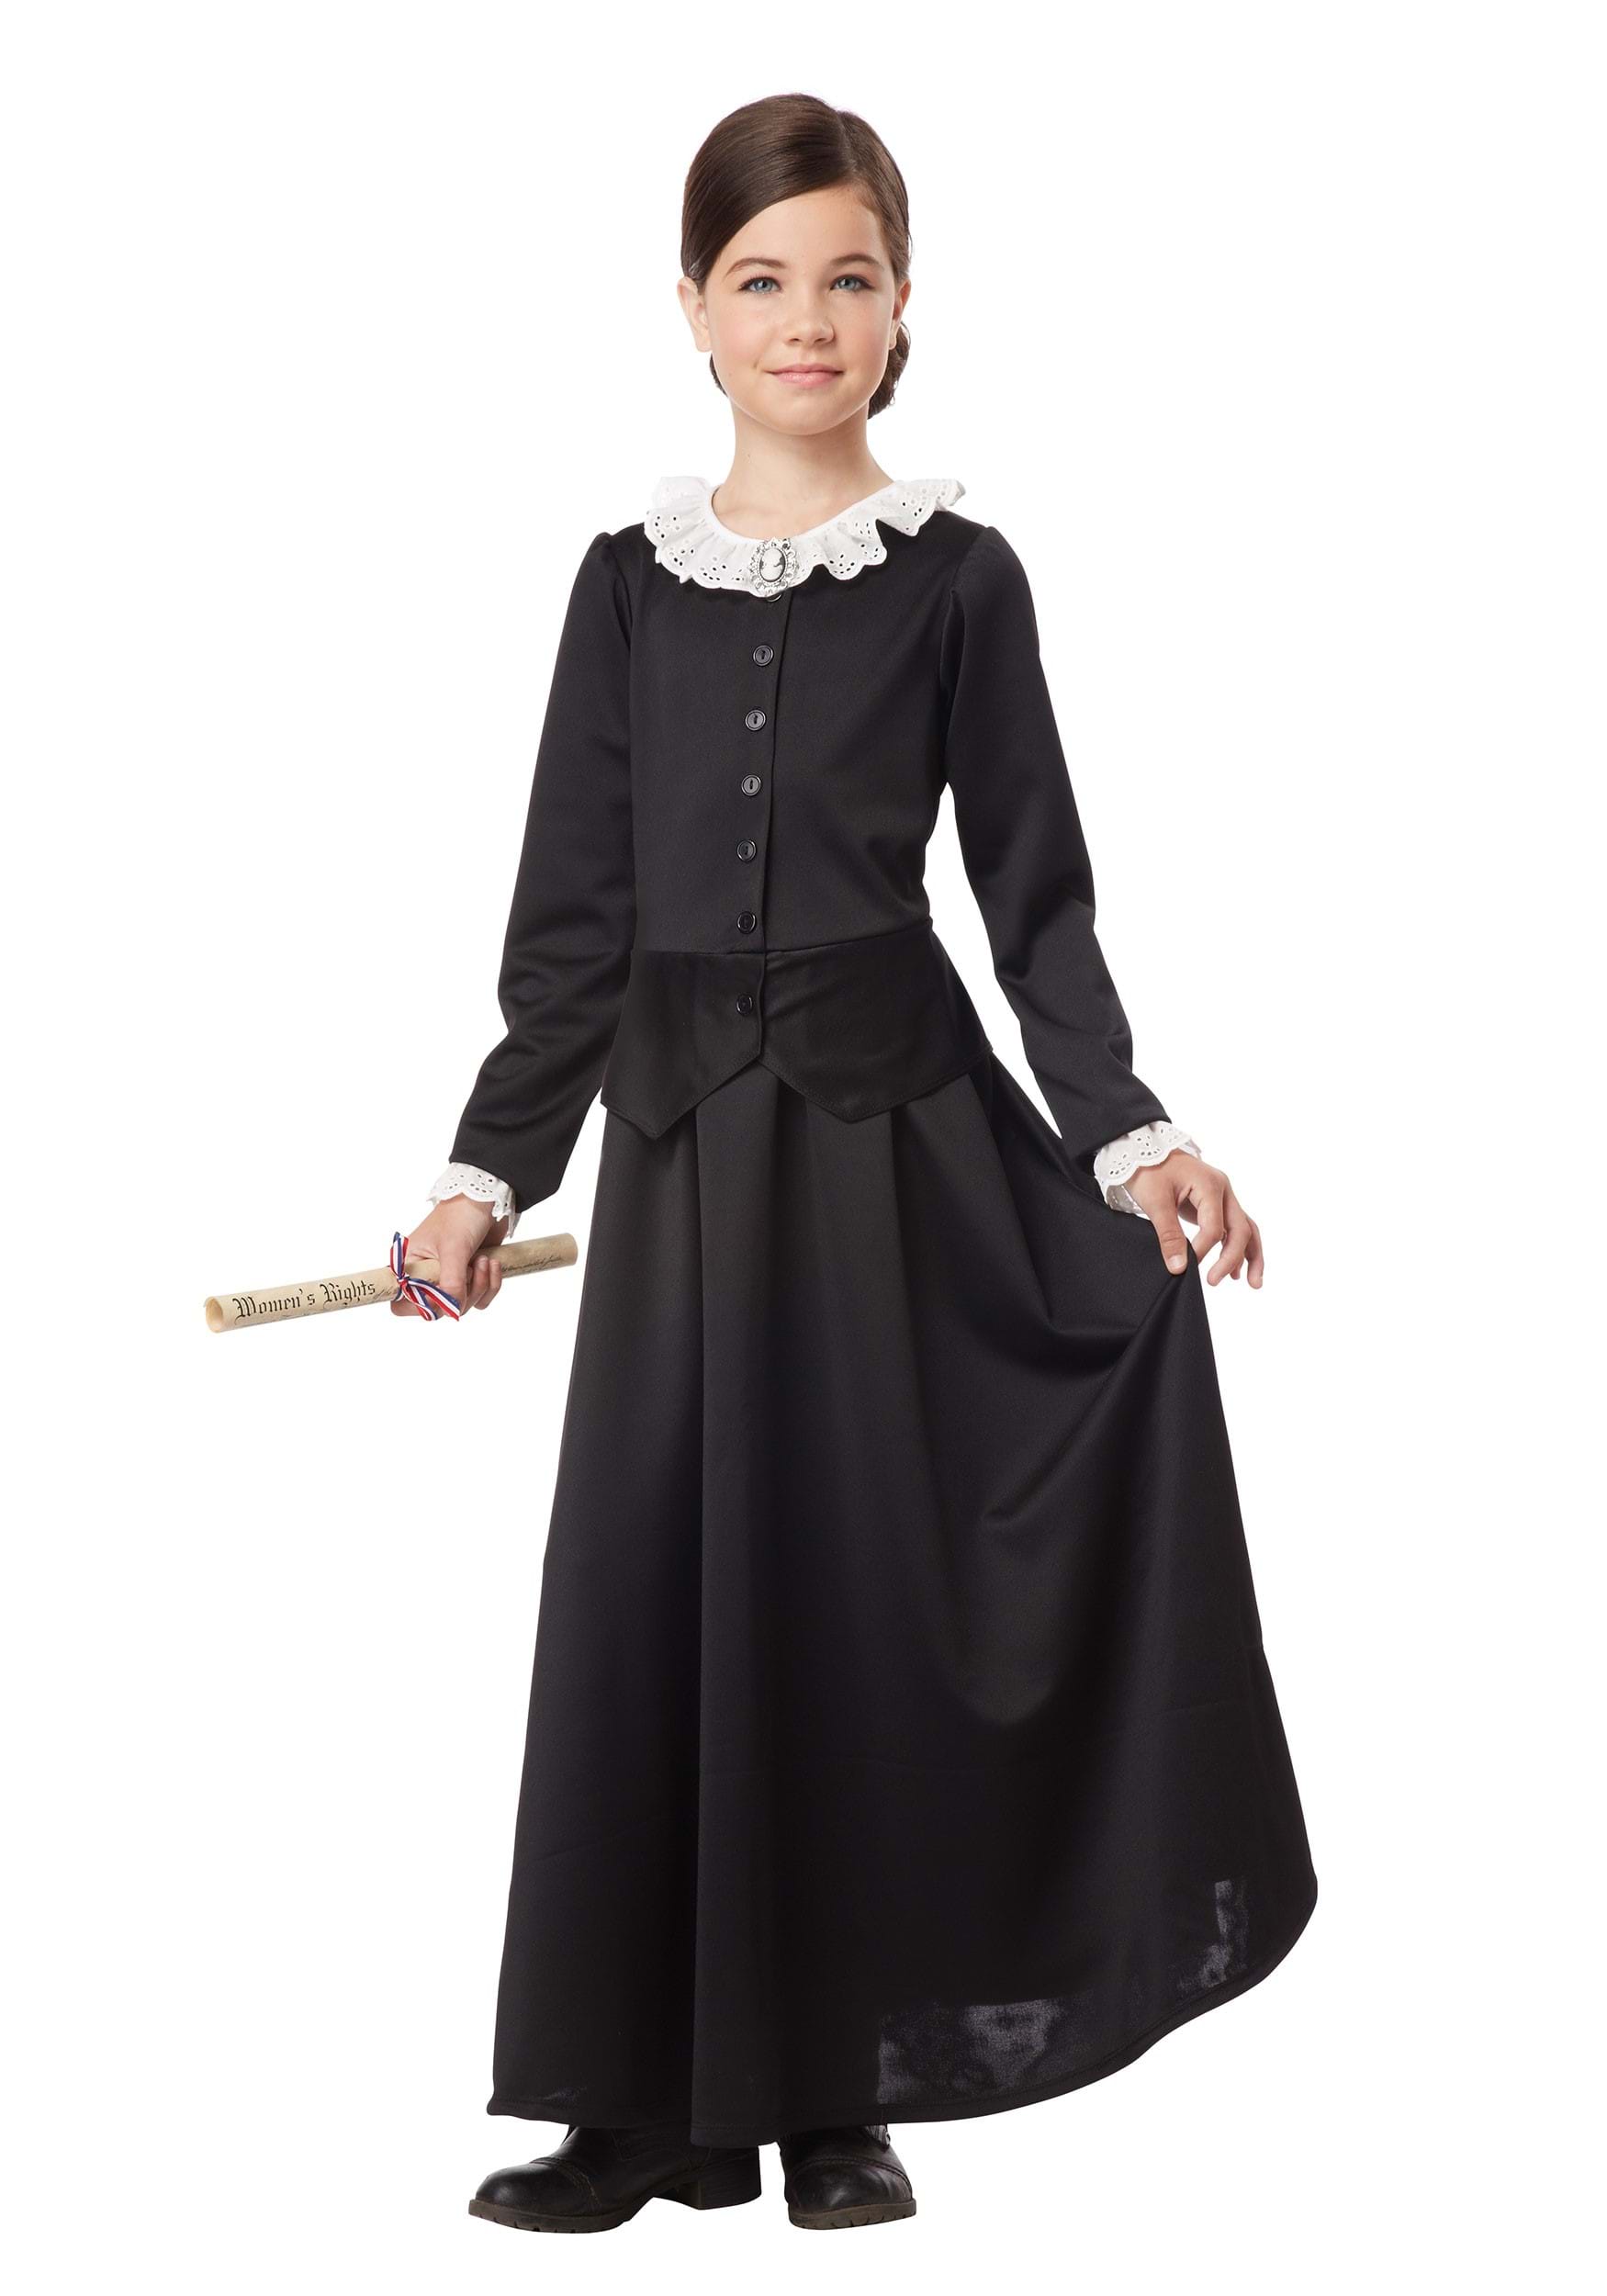 Harriet Tubman/Susan B. Anthony Costume For Girls